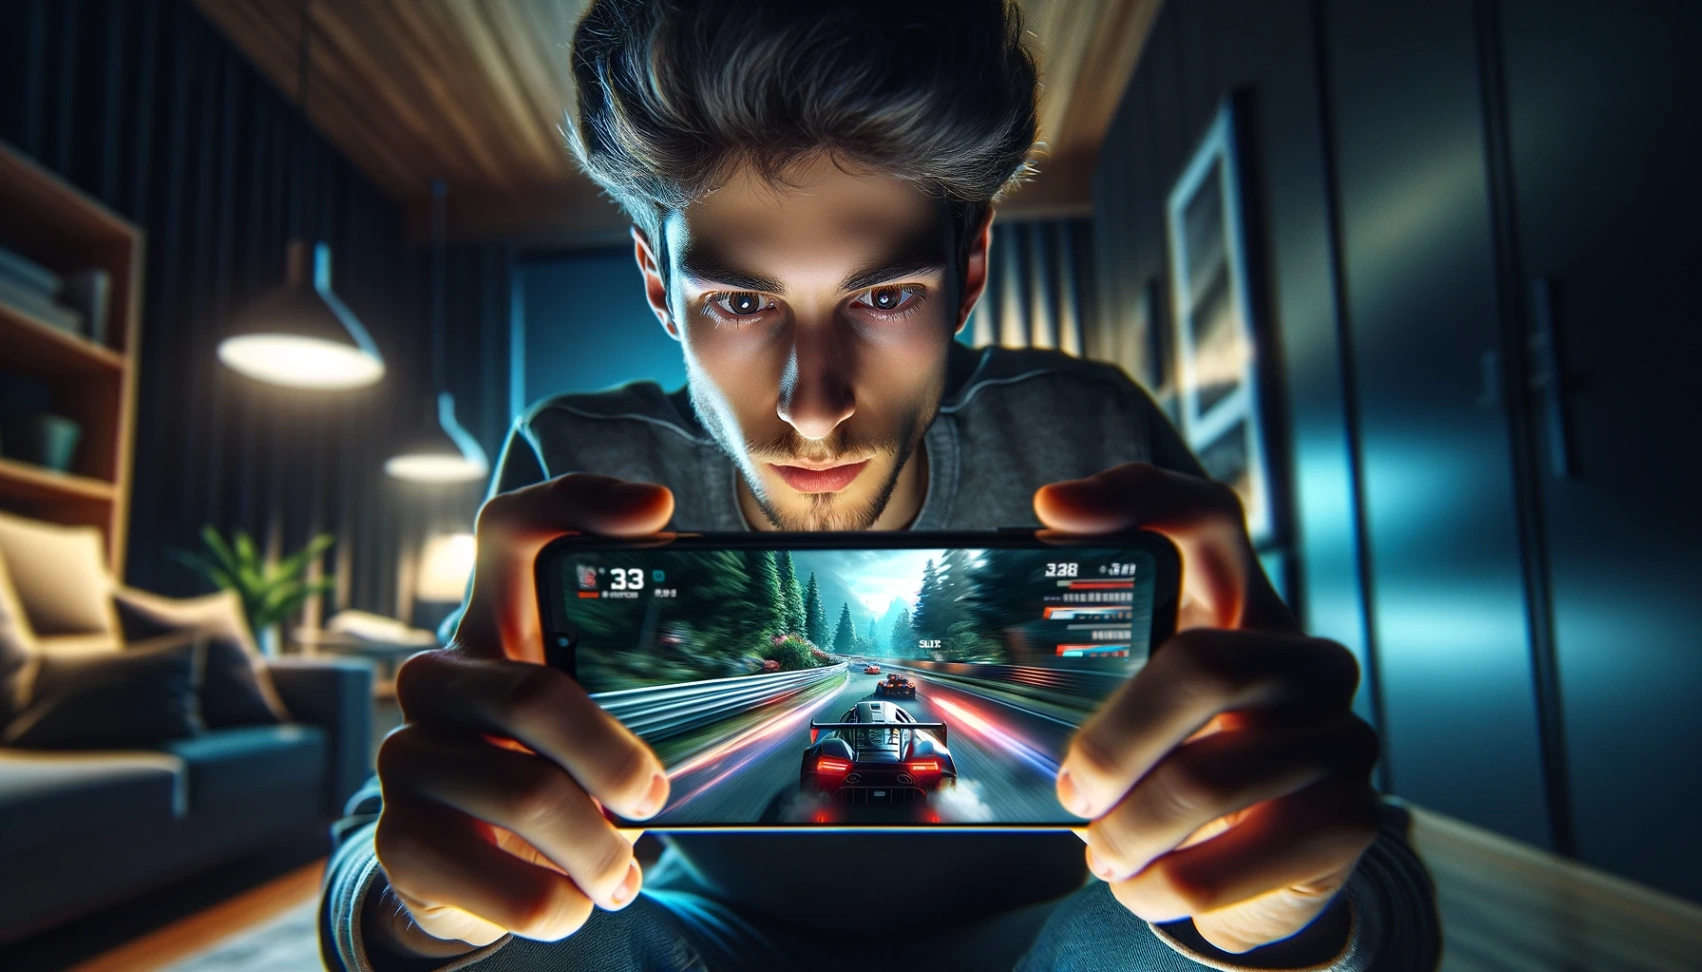 Why You'll Love These Top 5 Mobile Racing Games